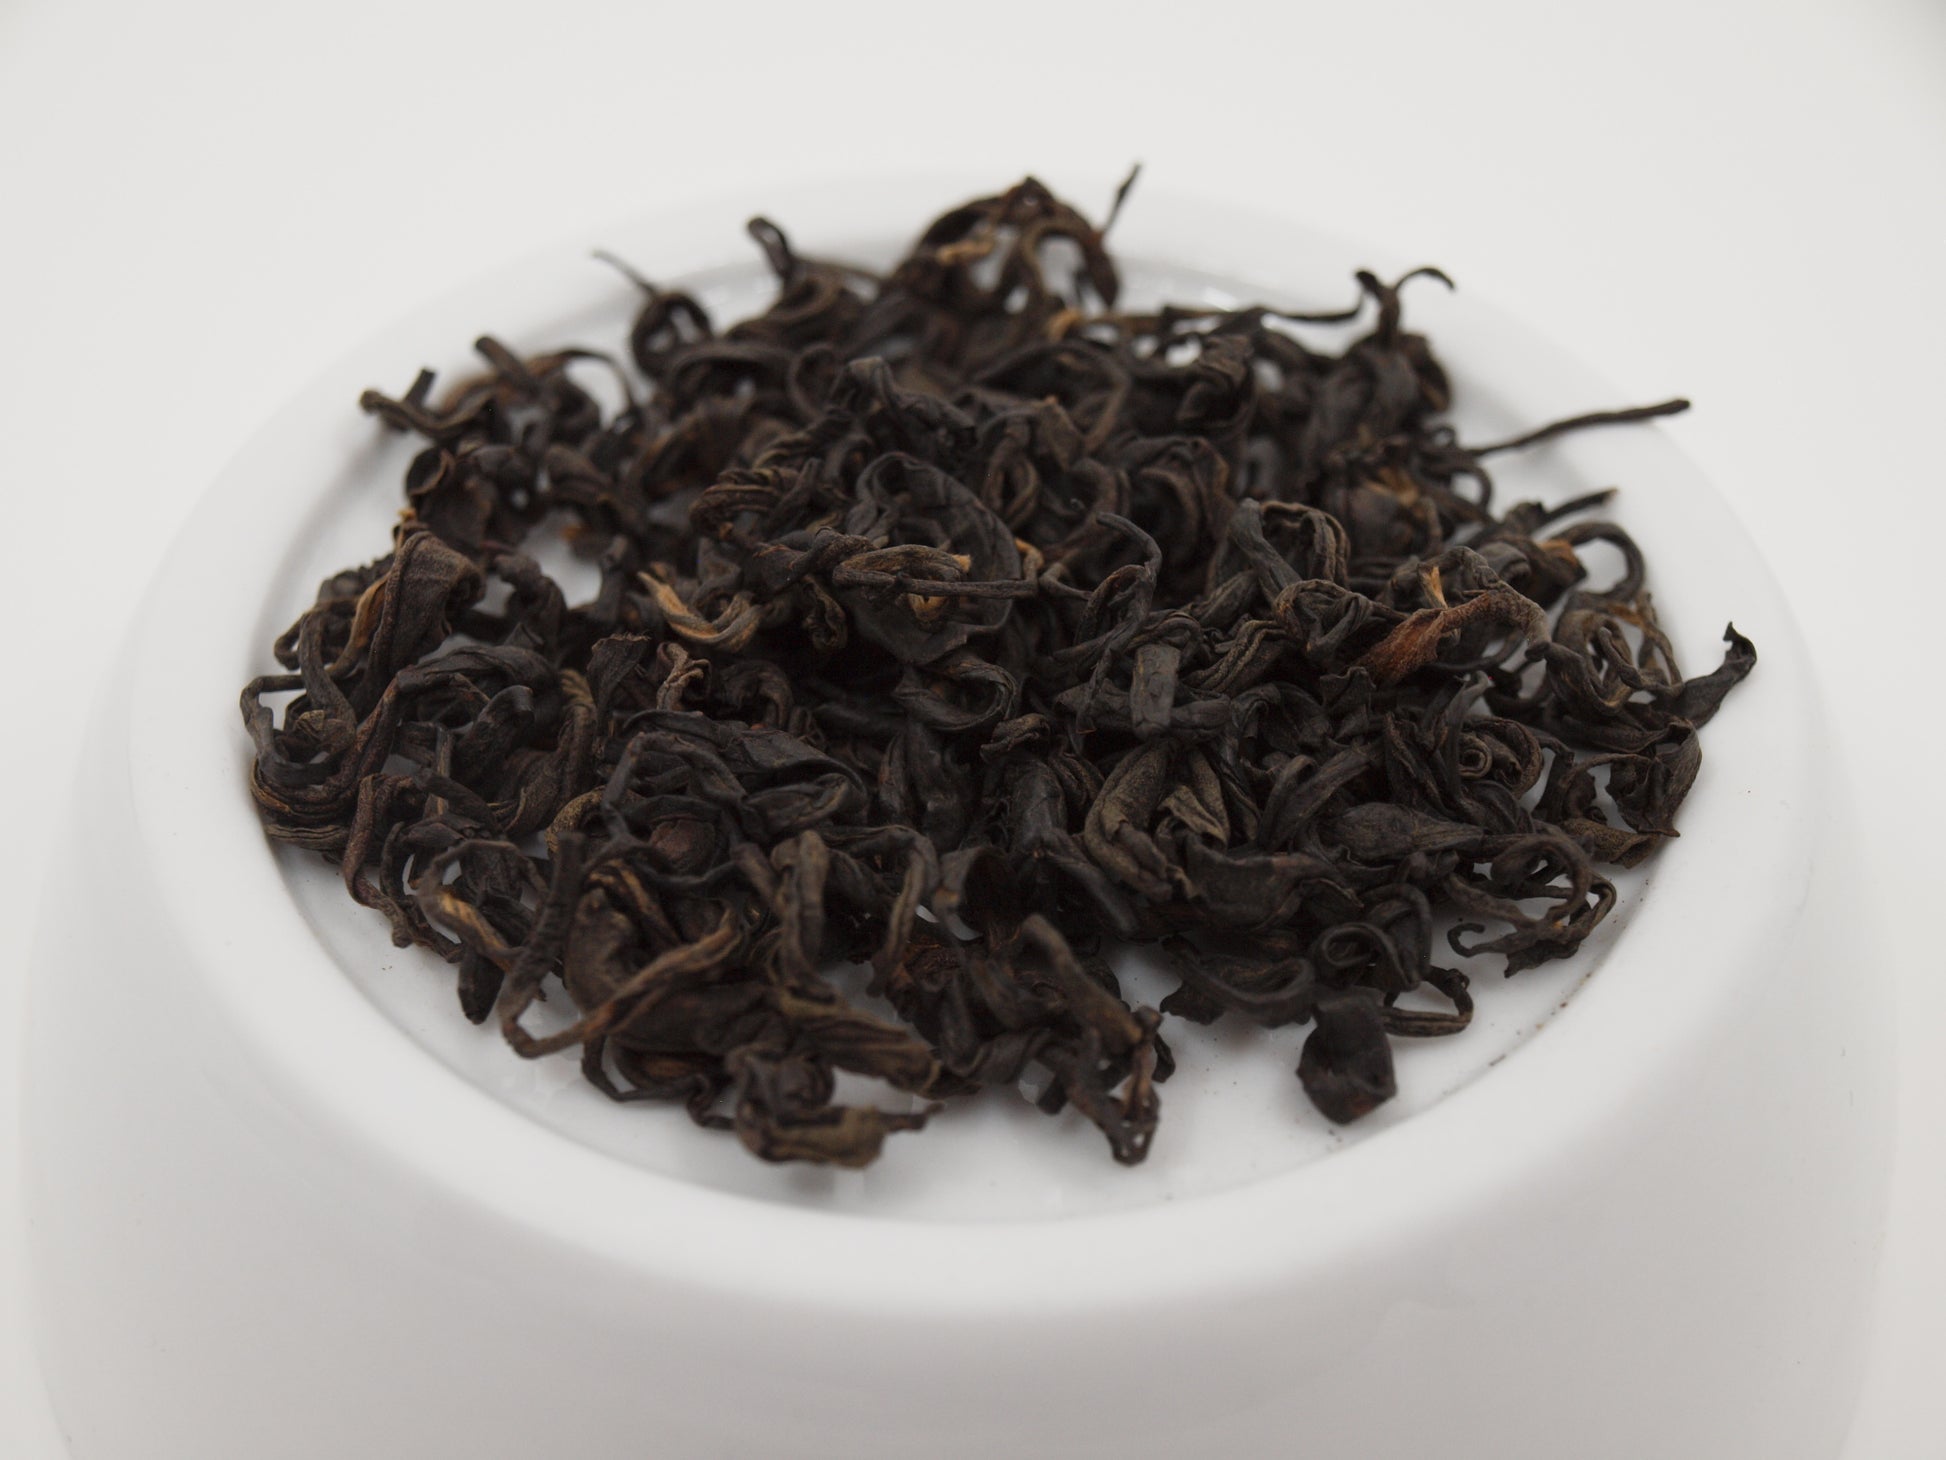 Nepali Oolong tea resting on a dish, close up perspective